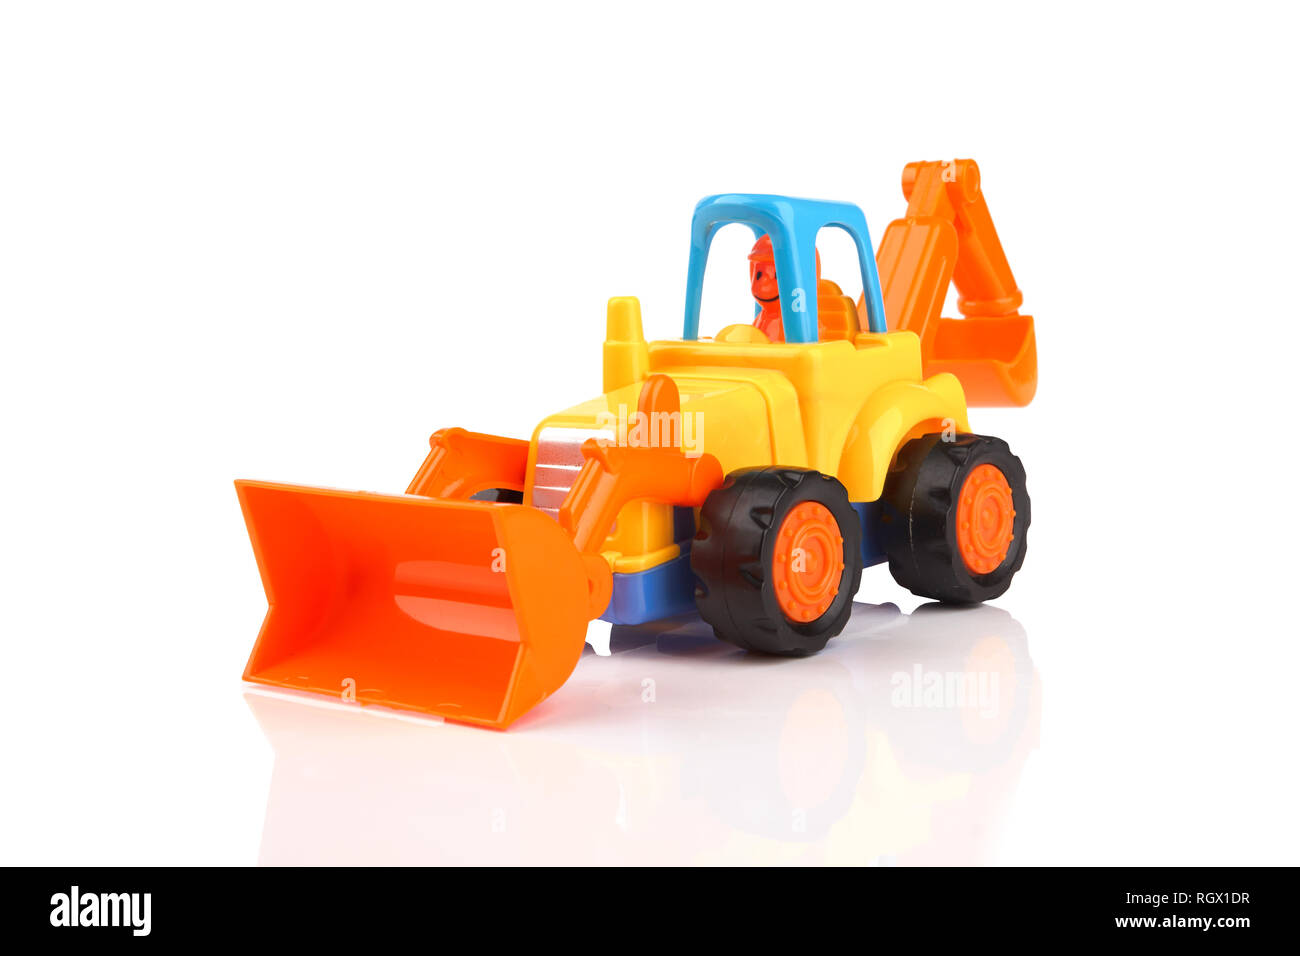 Colorful toy truck isolated on white background Stock Photo - Alamy